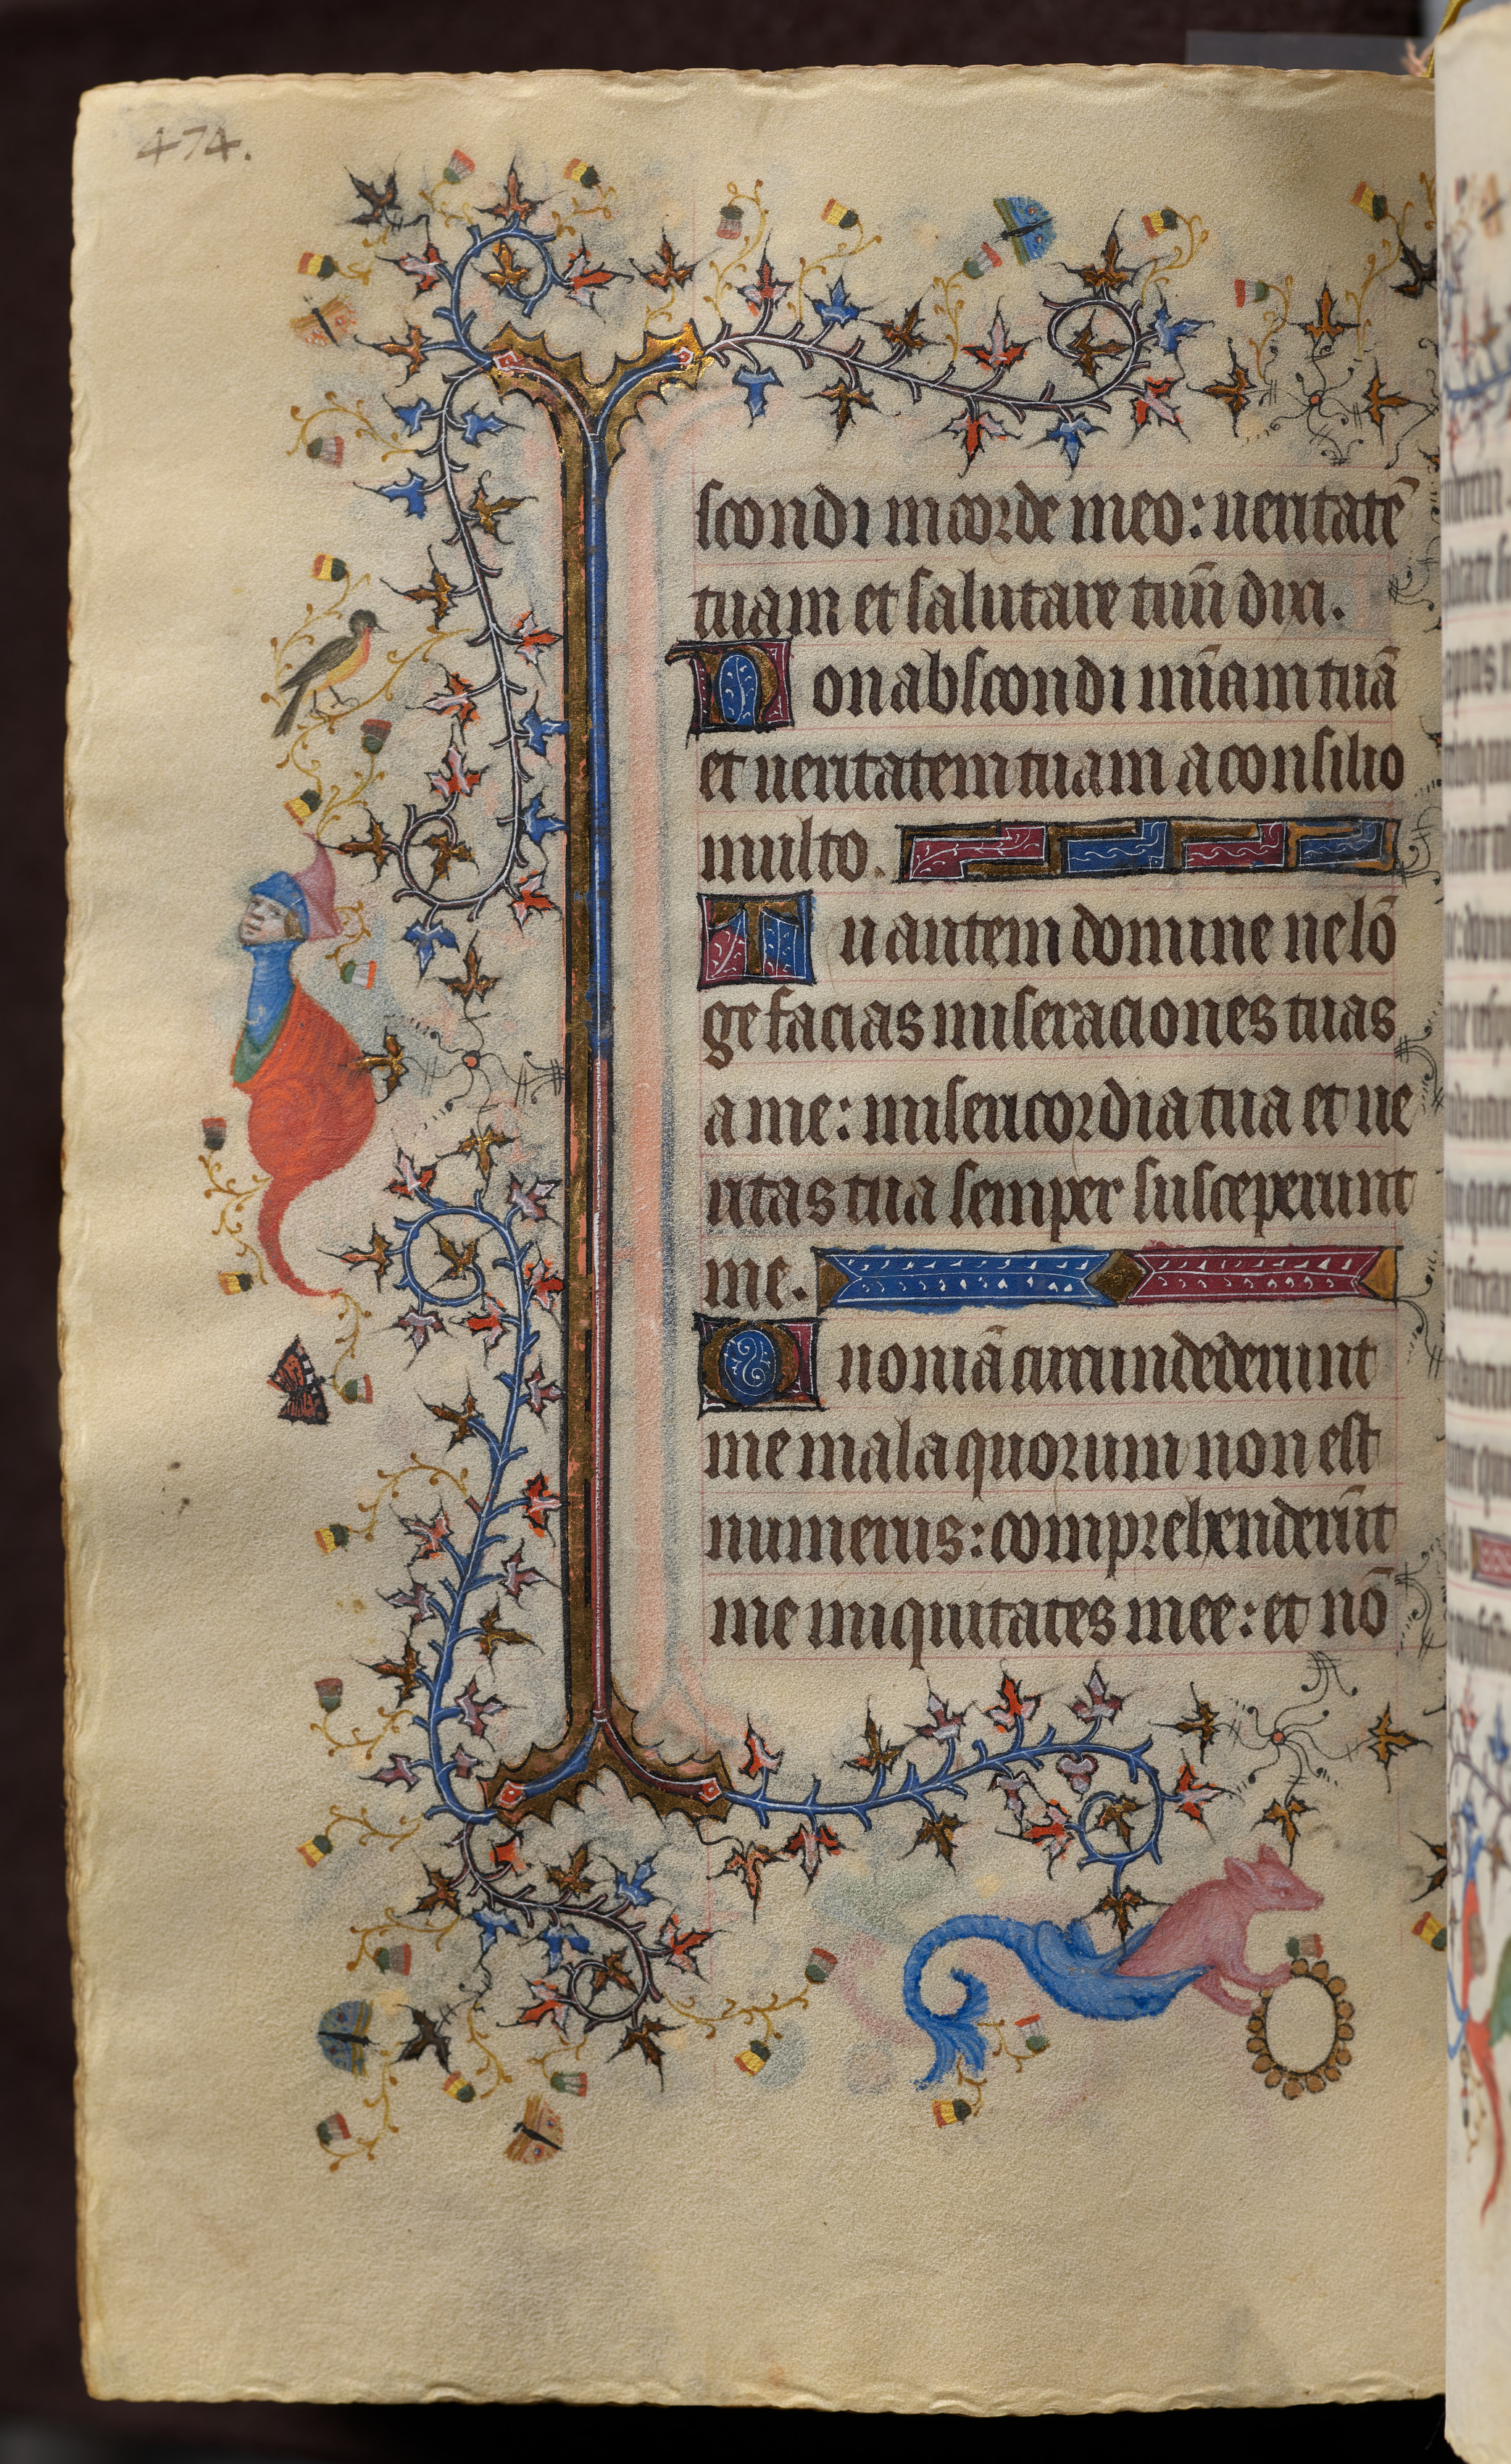 Hours of Charles the Noble, King of Navarre (1361-1425): fol. 231v, Text